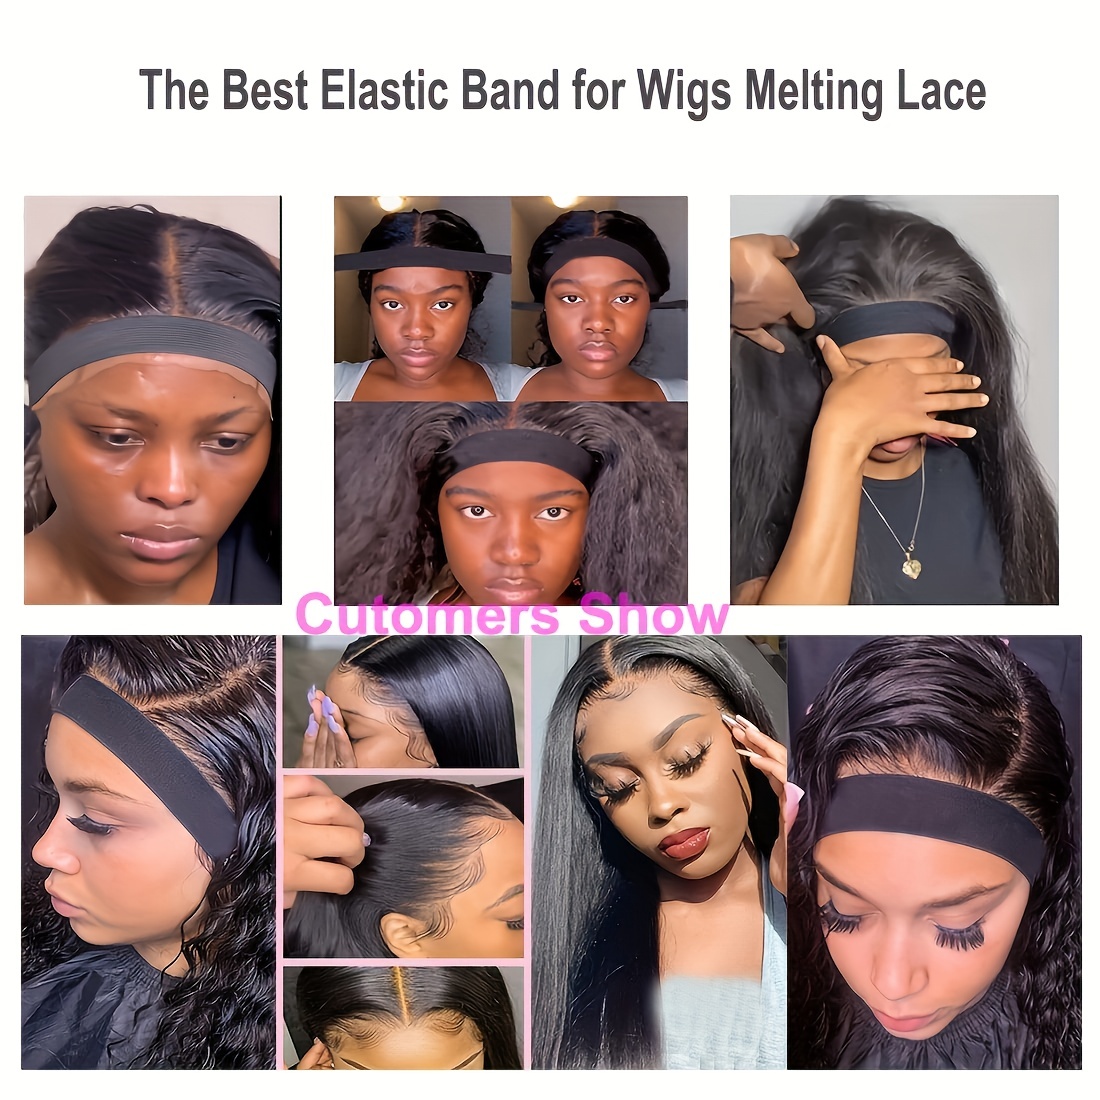 Moosup Elastic Band for Wigs Edges Bands with Velco Ends, Adjustable Elastic Band for Wigs, Elastic Headband Edge Laying Band for Baby Hair Closure Frontal